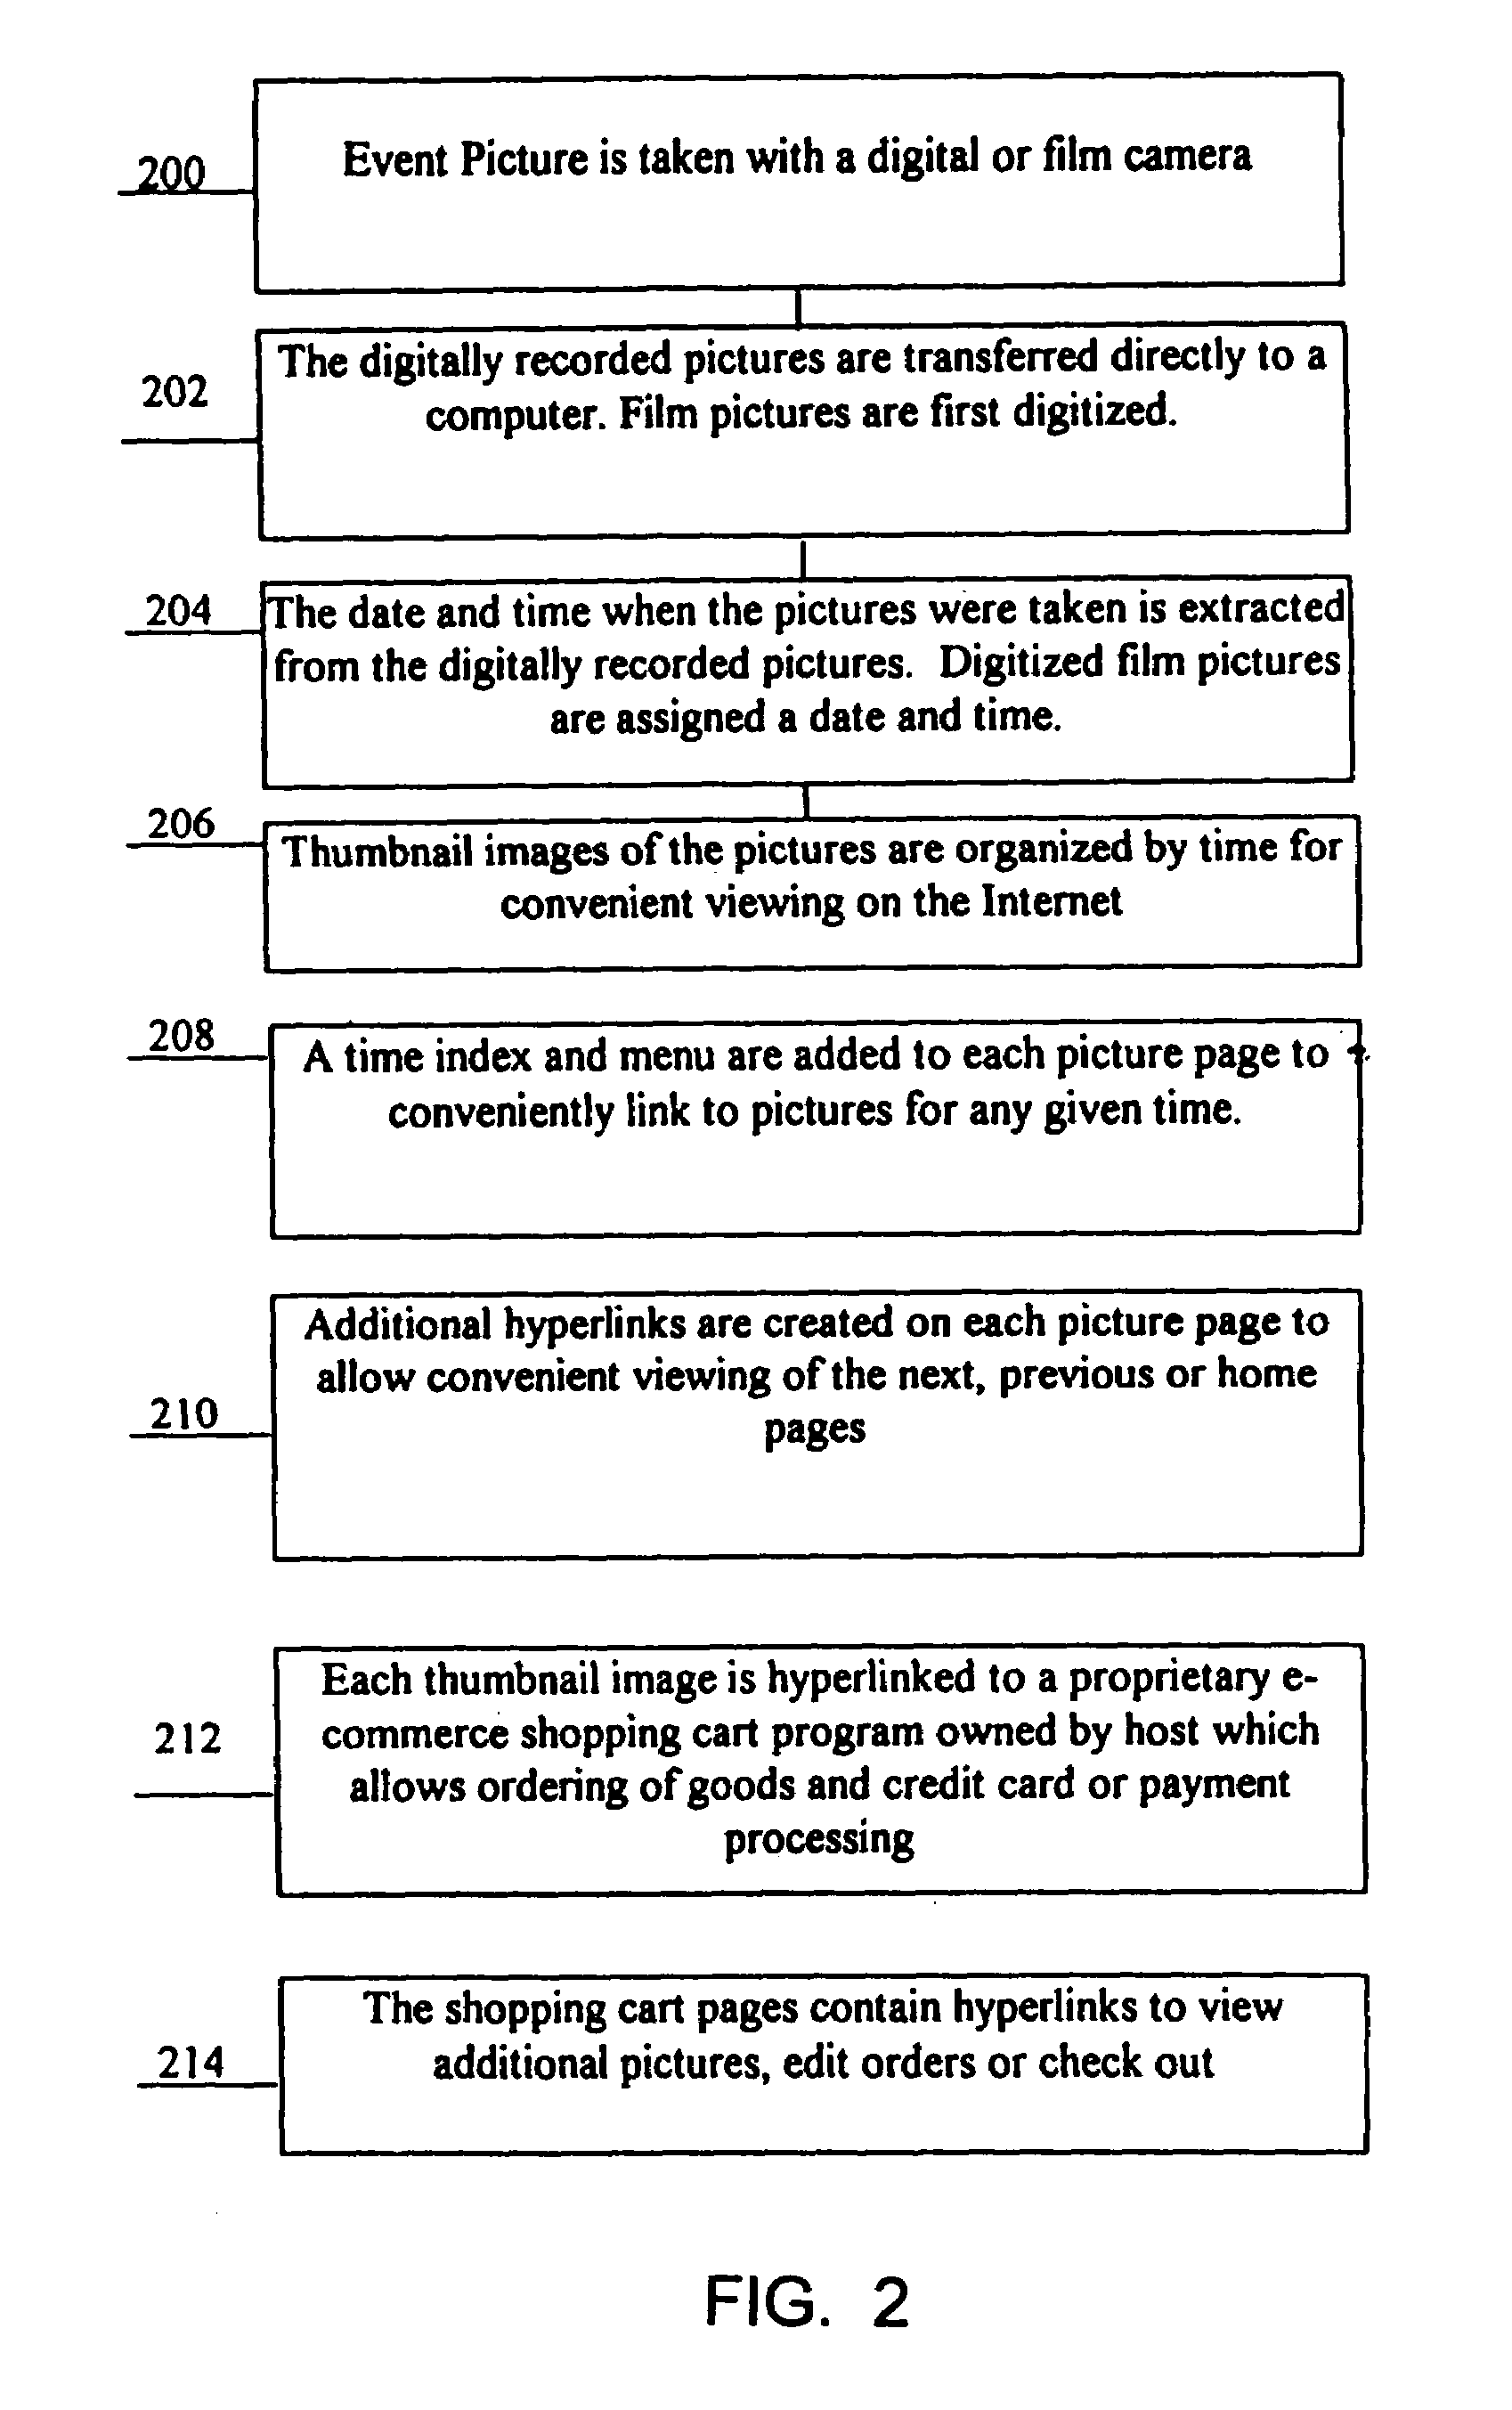 Process for providing event photographs for inspection, selection and distribution via a computer network